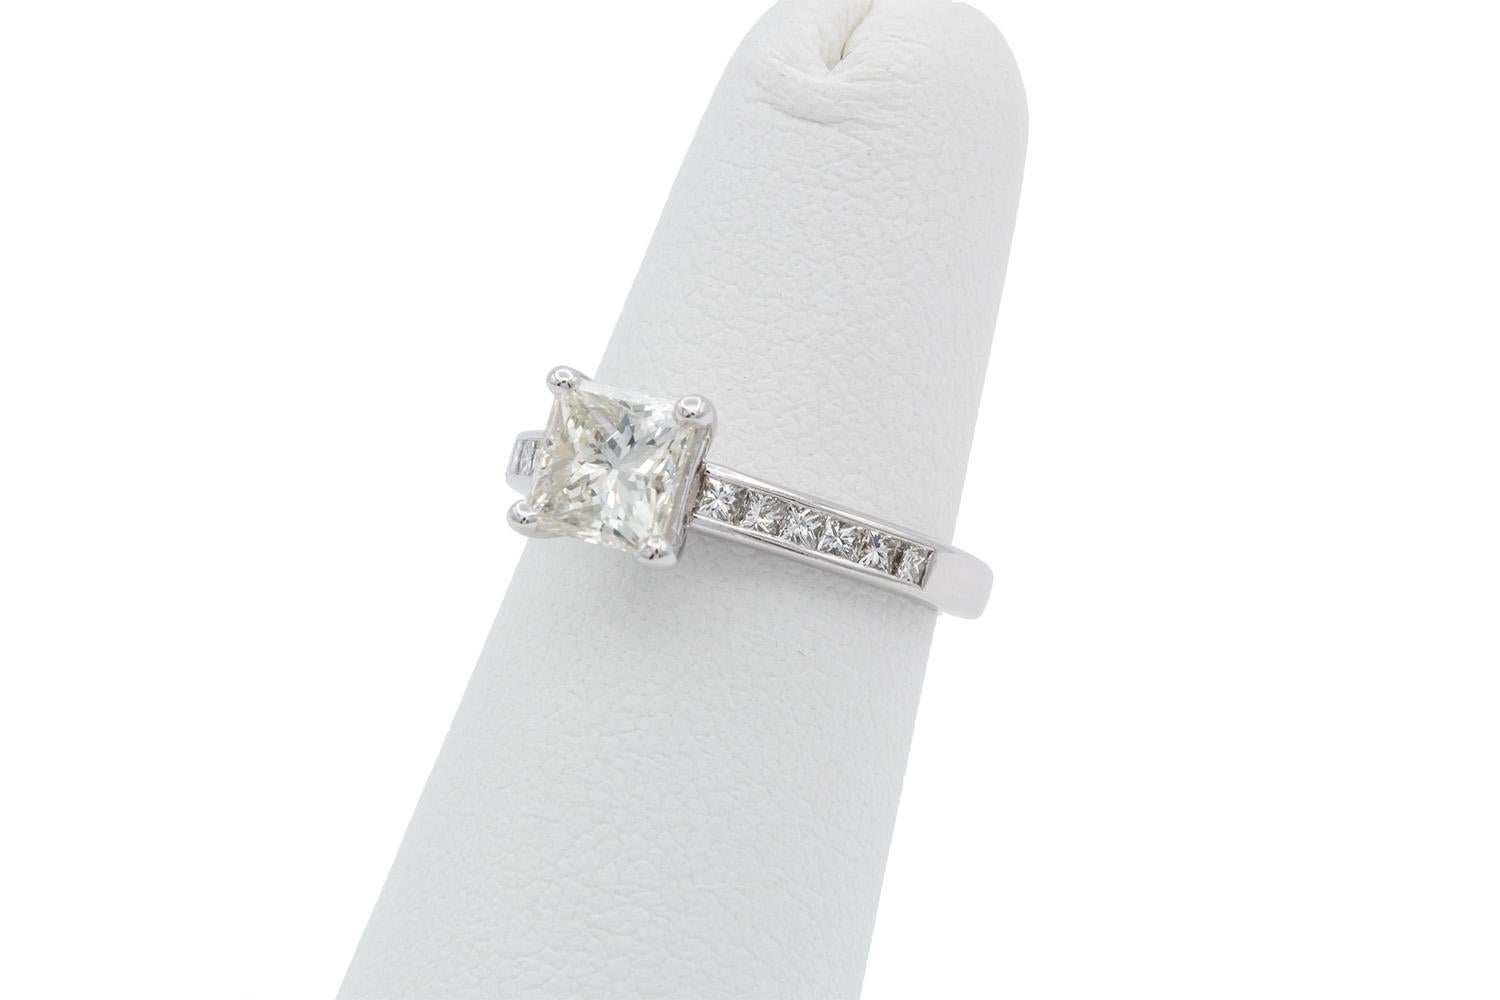 GIA Certified Princess Cut Diamond Solitaire Engagement Ring 1.29ctw J/SI2 For Sale 2